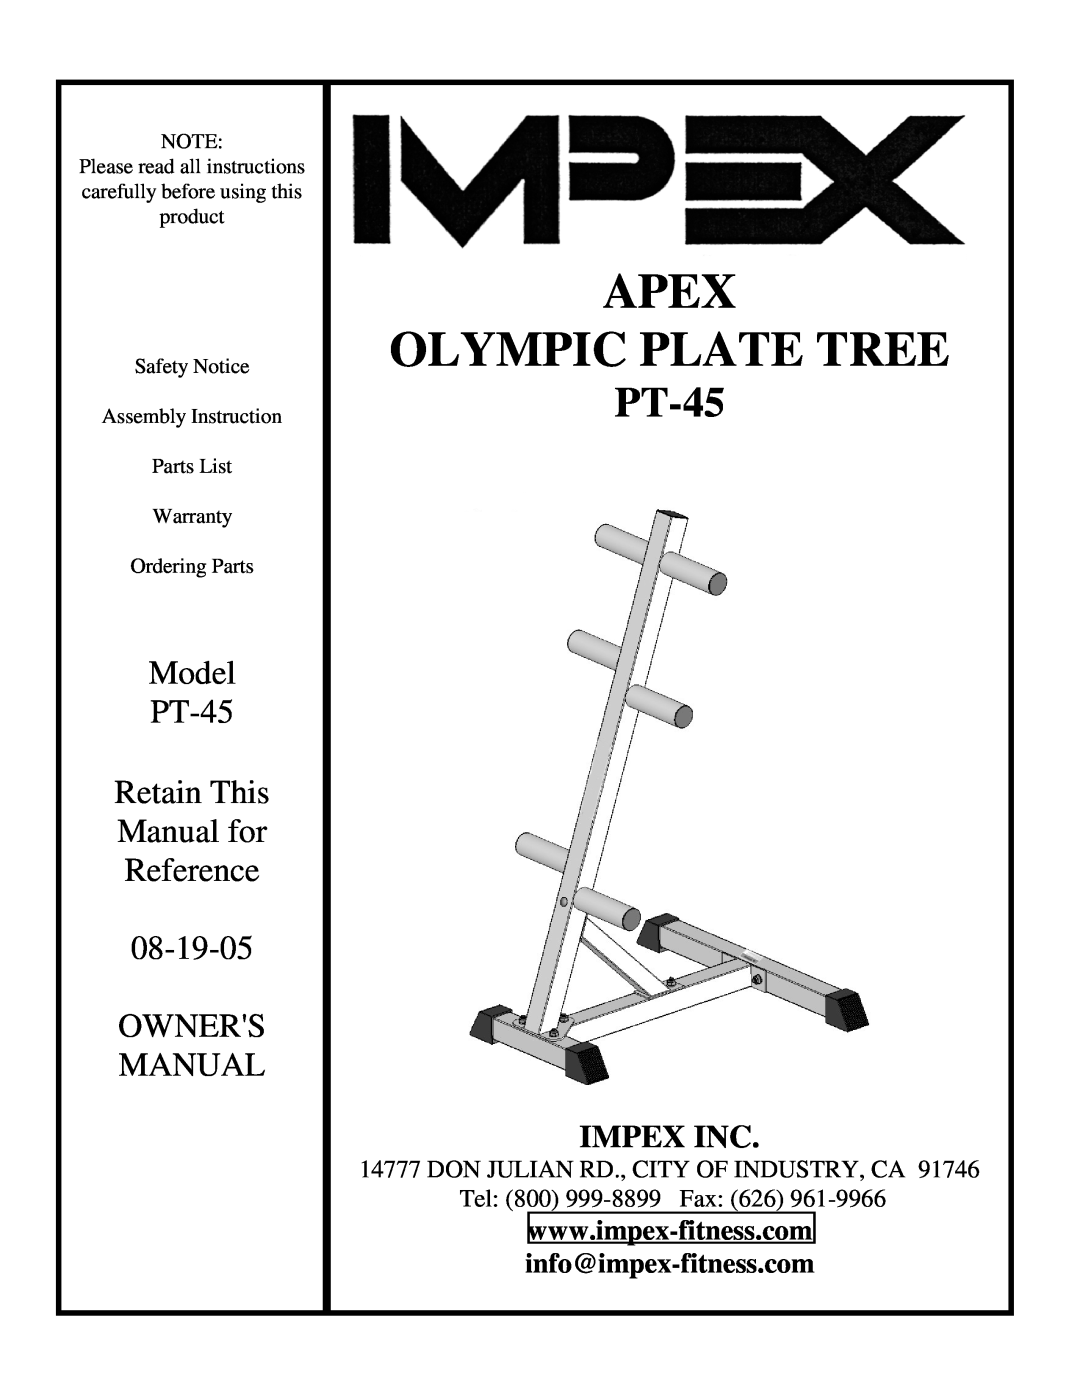 Impex manual Apex Olympic Plate Tree, Model PT-45 Retain This Manual for Reference 08-19-05 OWNERS MANUAL, Impex Inc 